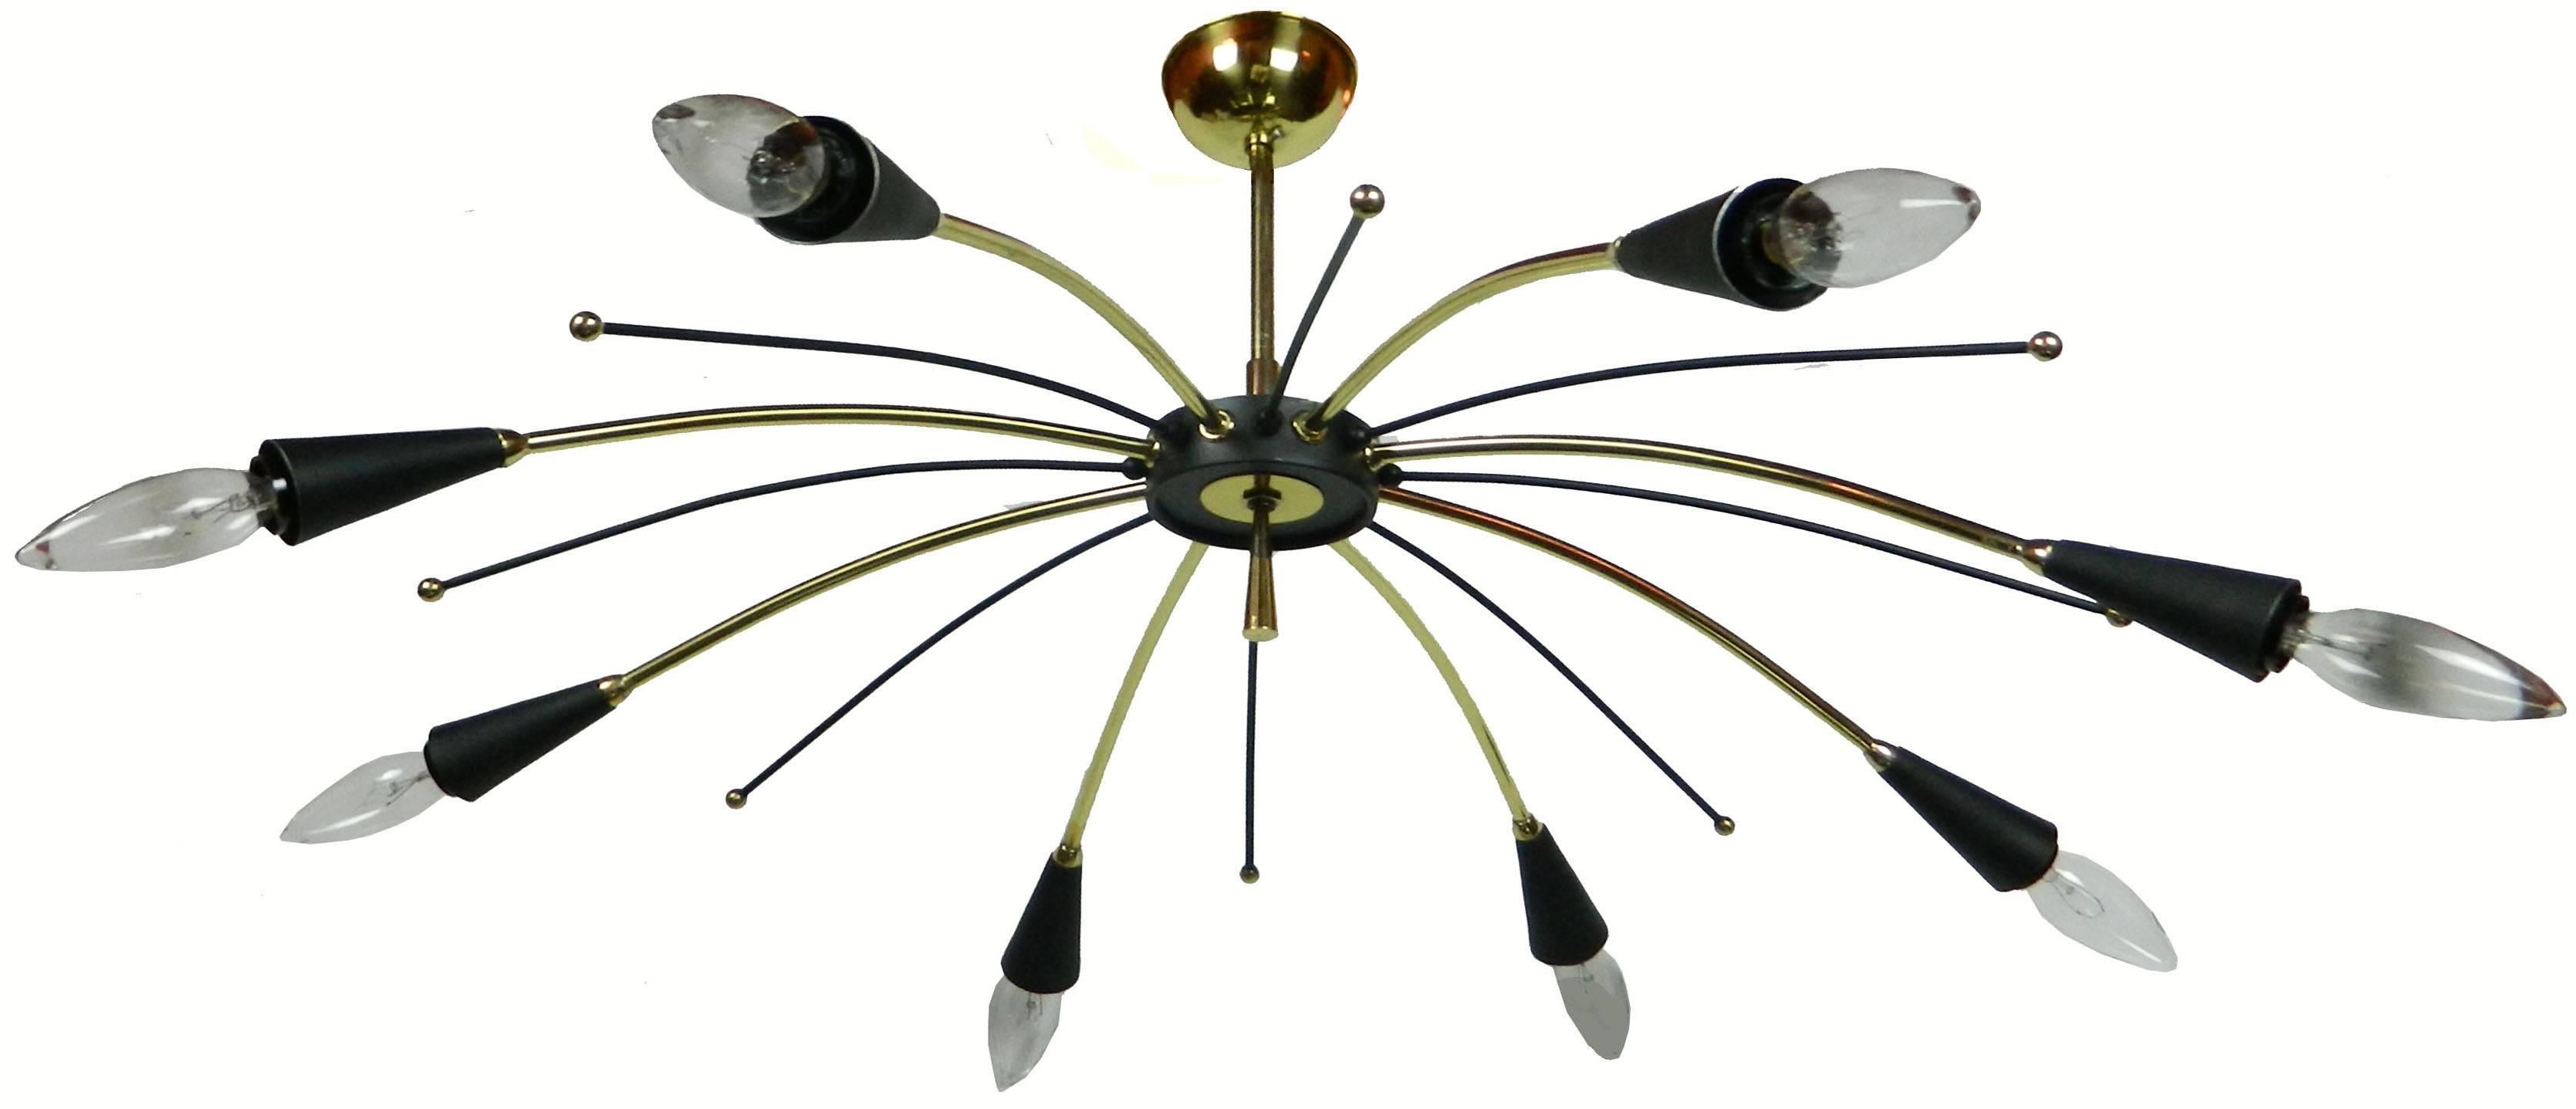 Superb Stilnovo style eight lights flush mount chandelier. 
US rewired and in working condition. 
60 watts max per bulb.